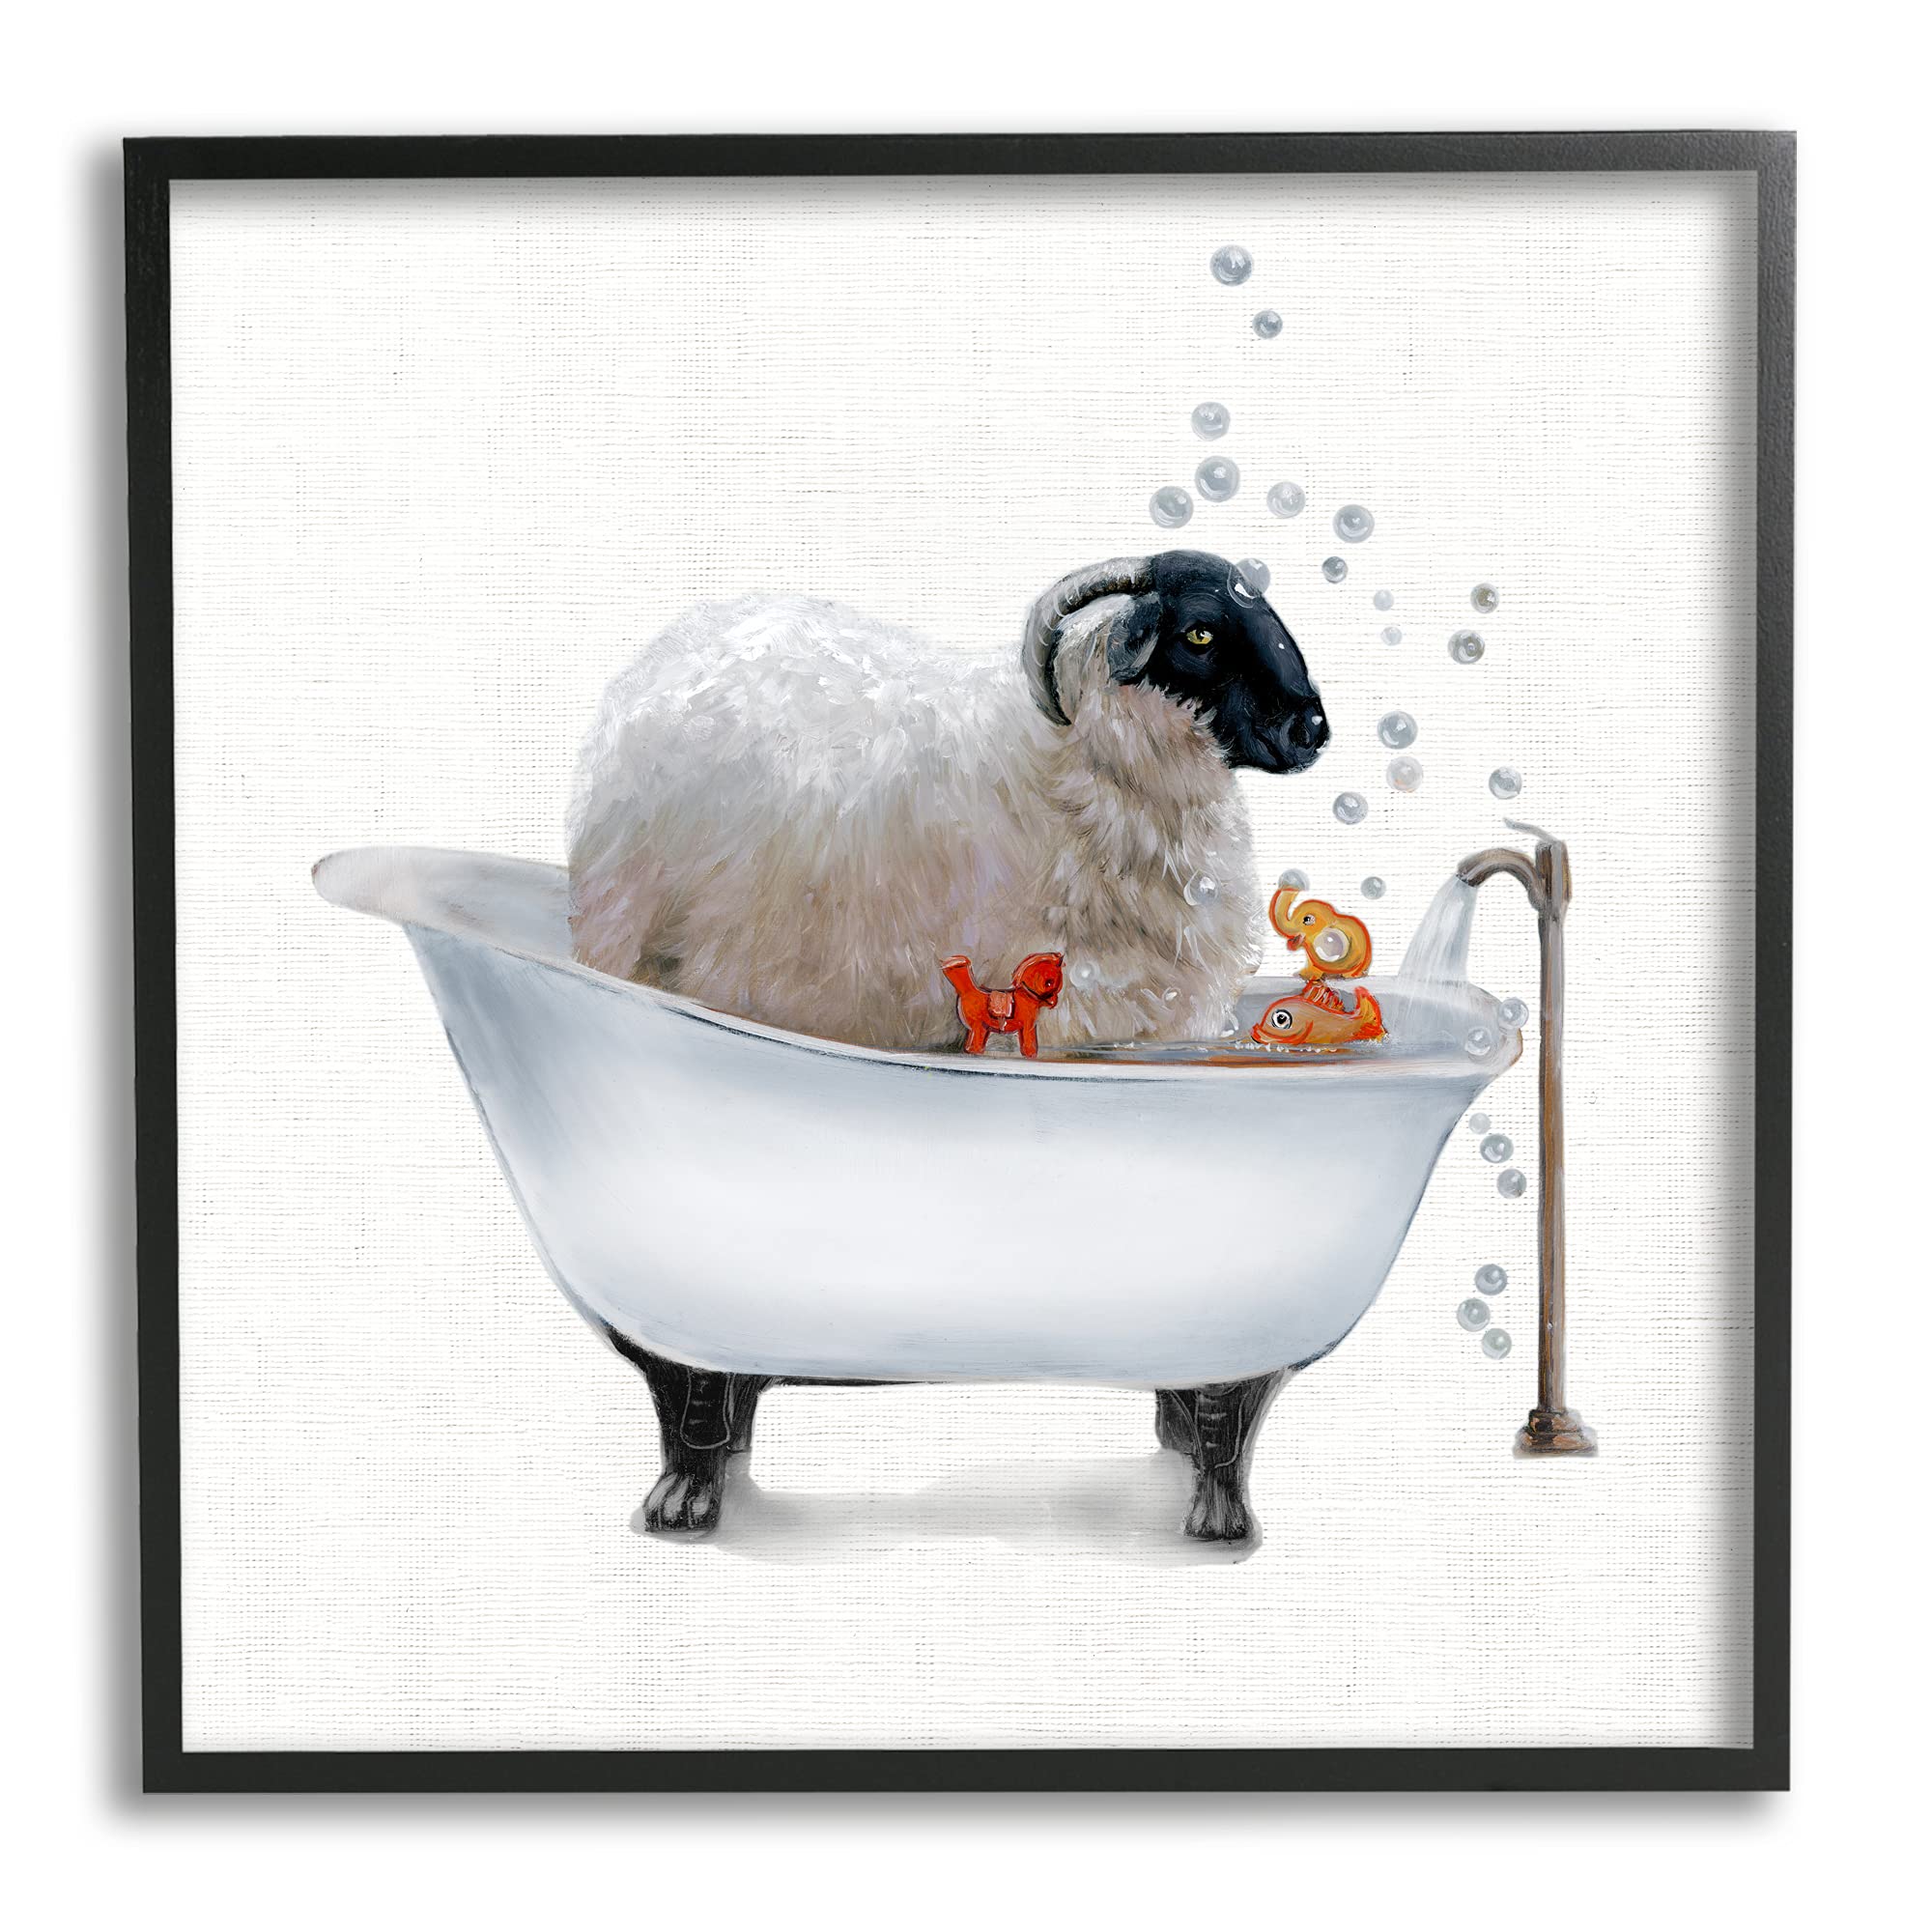 Stupell Industries Fluffy County Goat in Bathtub Soap Bubbles, Designed by Donna Brooks Black Framed Wall Art, 24 x 24, Grey